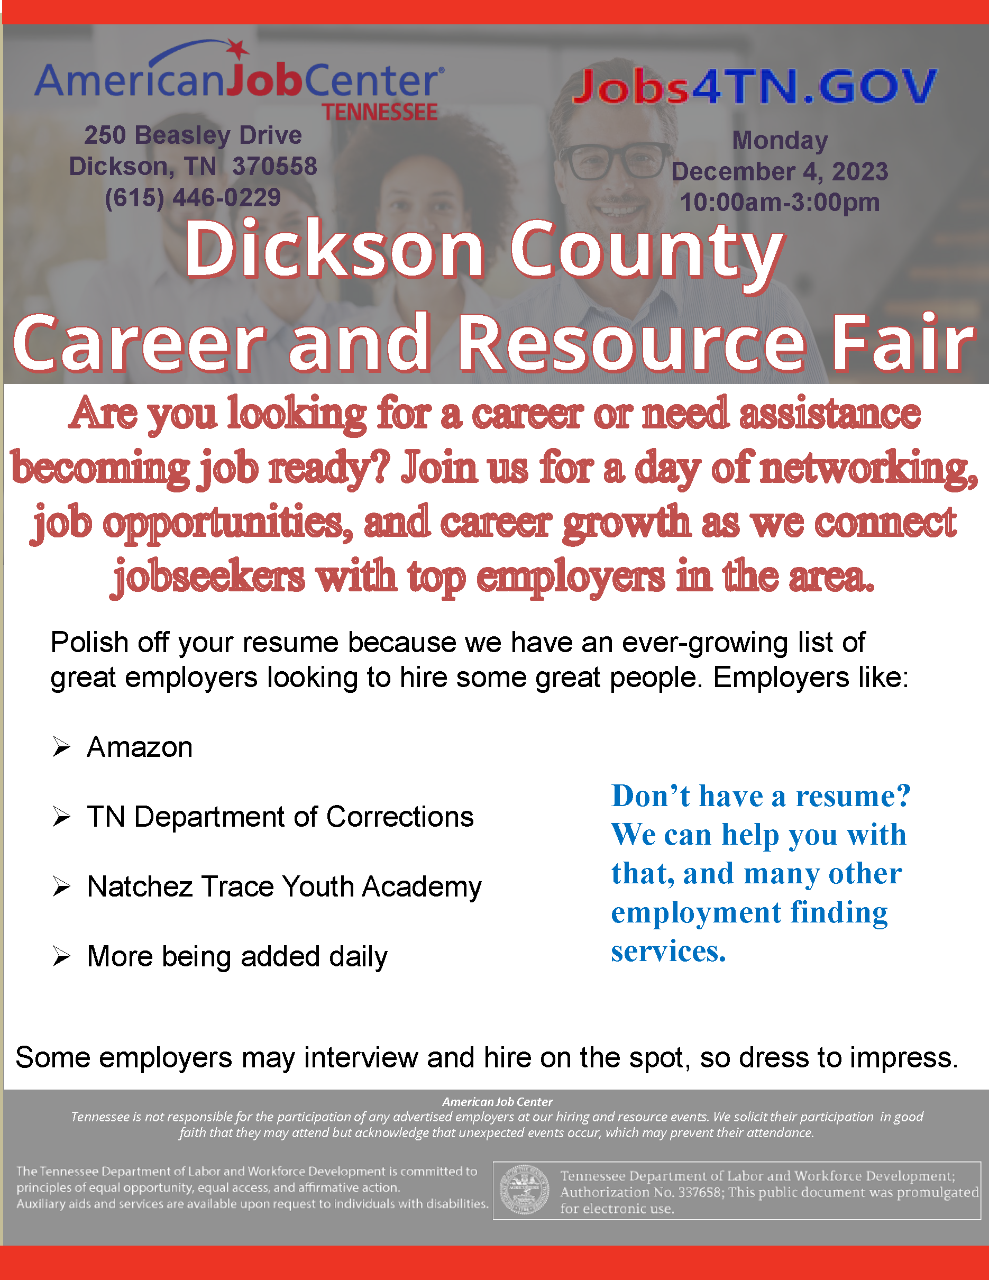 Dickson County Career and Resource Fair, December 4, 2023, 10 a.m. to 3 p.m., Dickson, TN, AJC